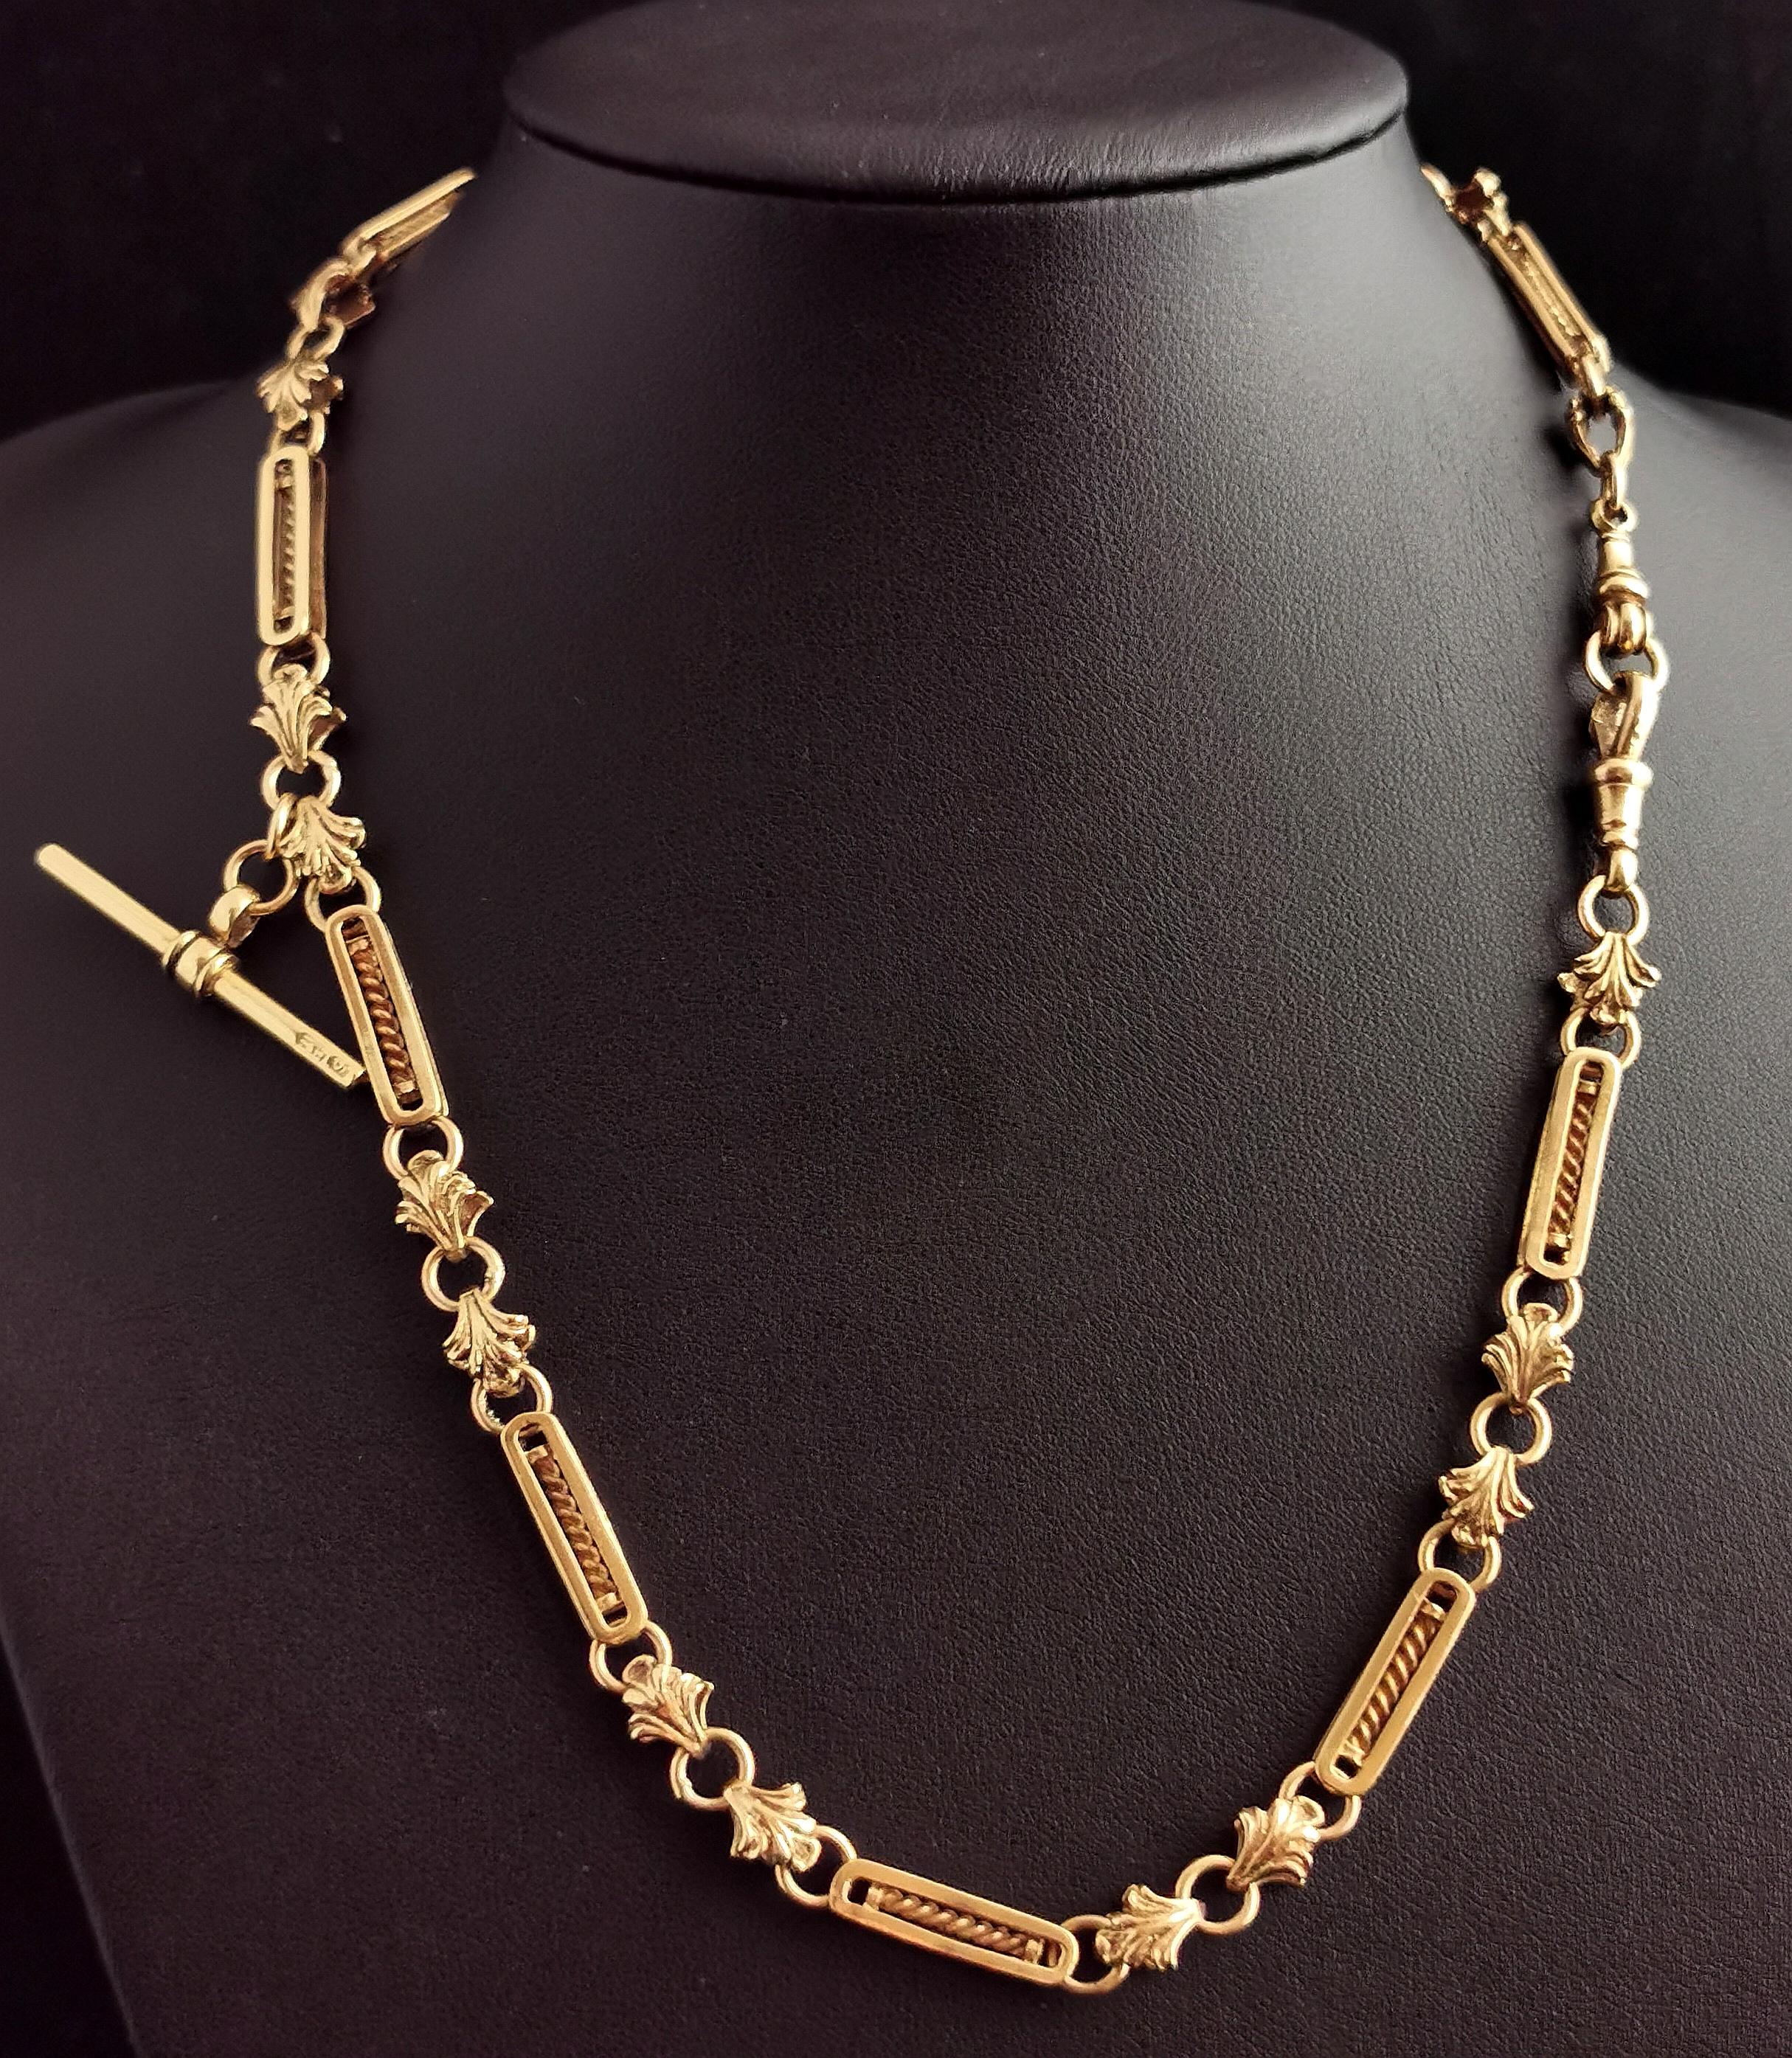 An outstanding antique, late Victorian era 9kt gold fancy link Albert chain.

This is one of the most decorative Albert chains I have seen with beautiful fancy bar and twist links consisting of bar links with twist designs within the bar itself,